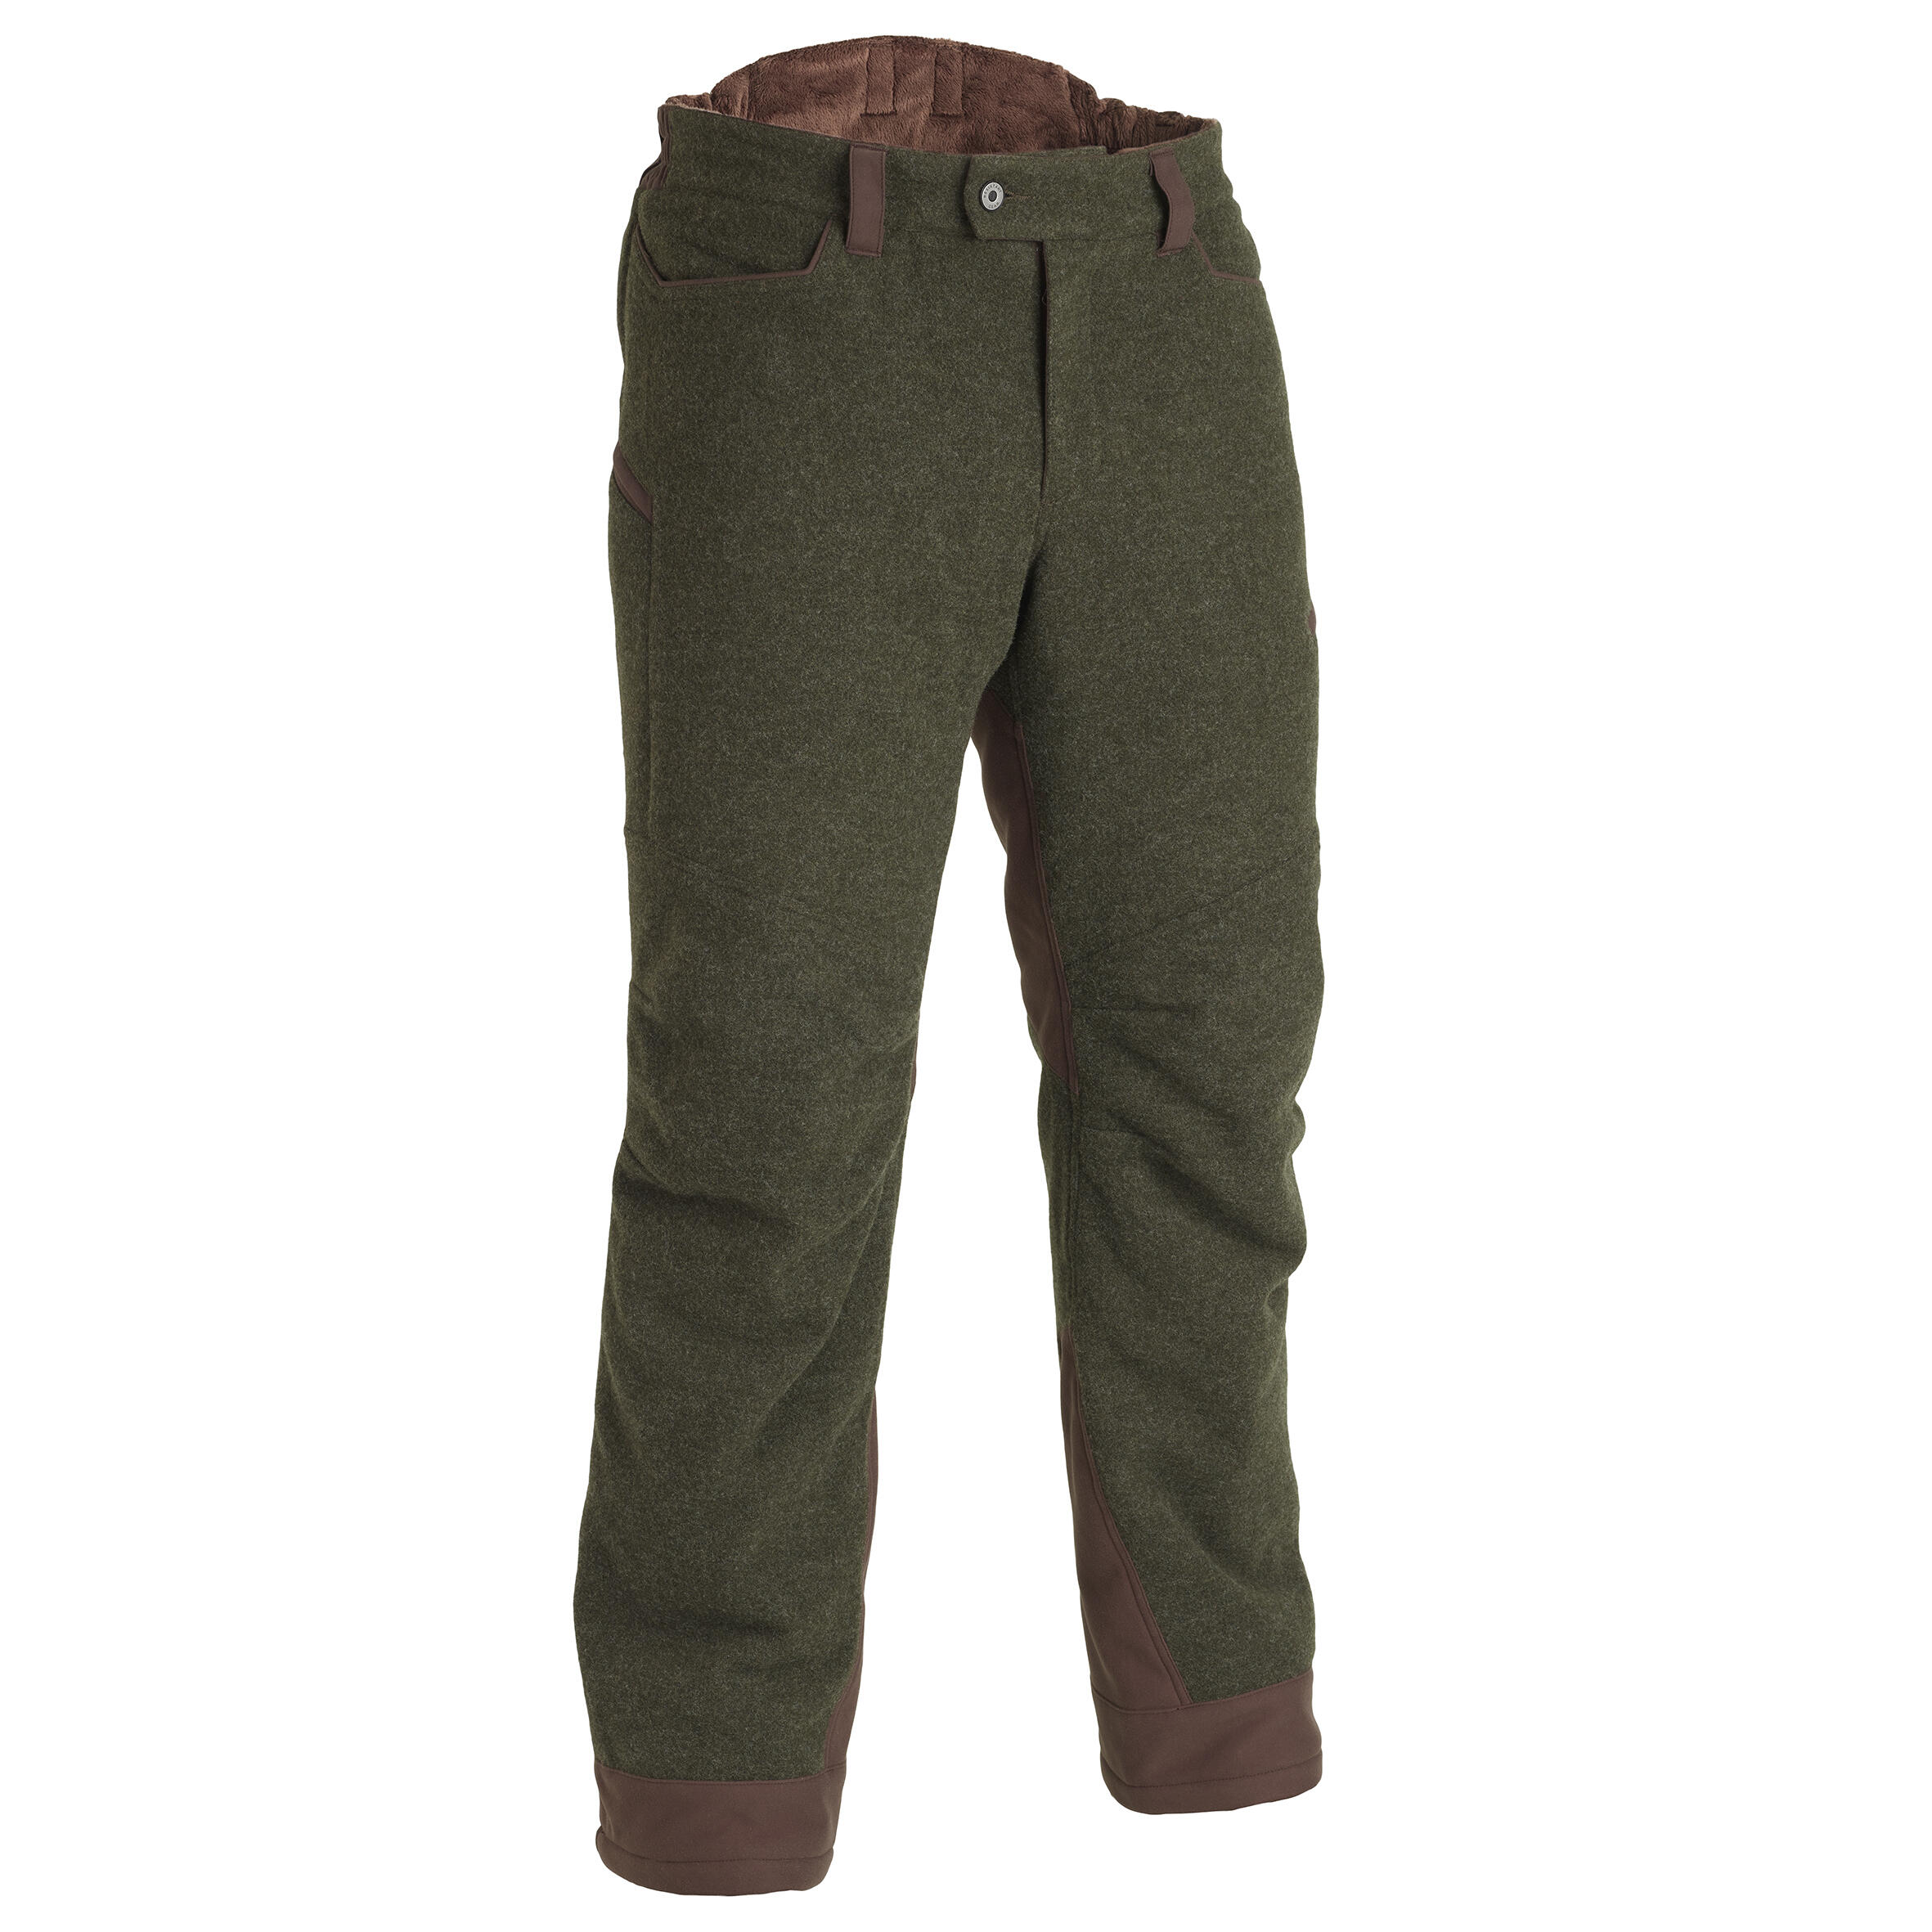 Big Bil Regular and Big and Tall Merino Wool Hunting and Shooting Cargo  Pants to Size 52 Made in Canada 234MER Green 30W x 31L at Amazon Mens  Clothing store